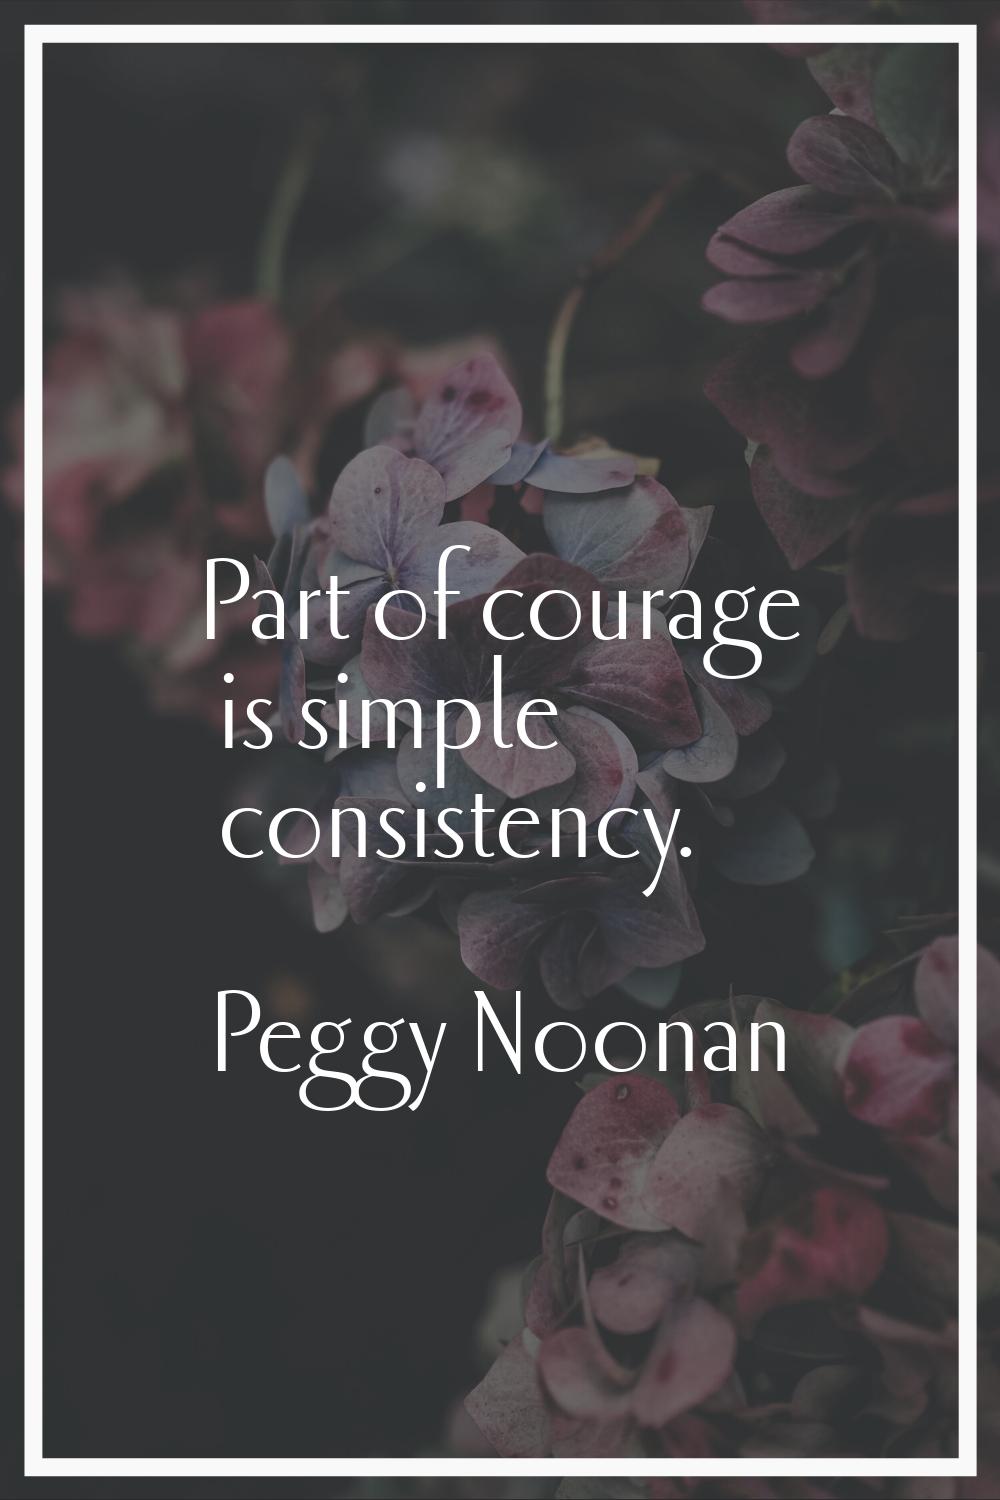 Part of courage is simple consistency.